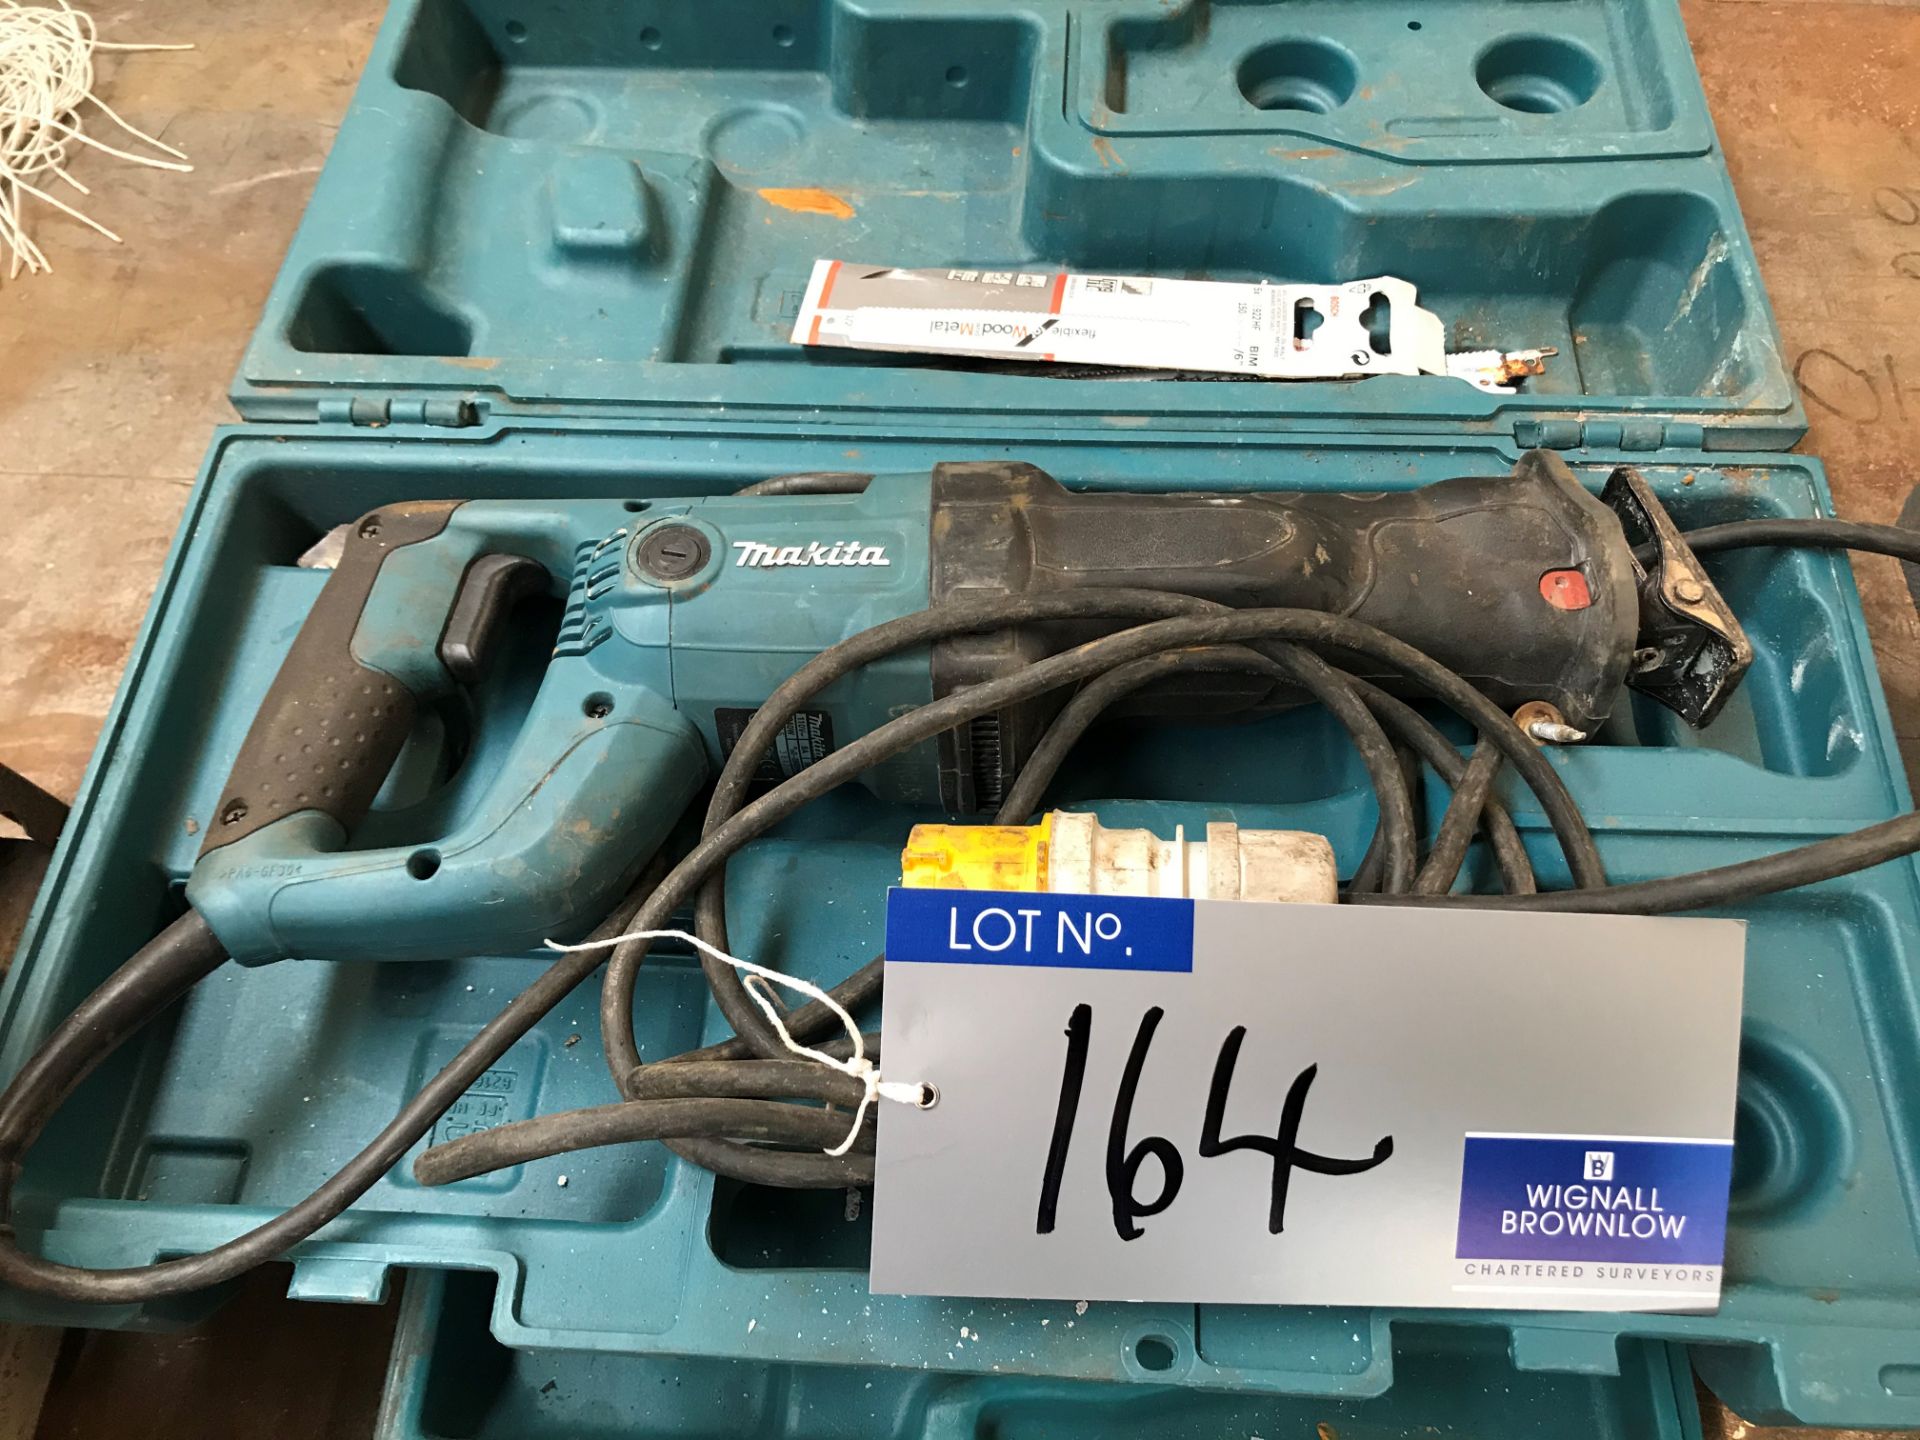 A Makita JR3050T Reciprocating Saw with case, 110v.